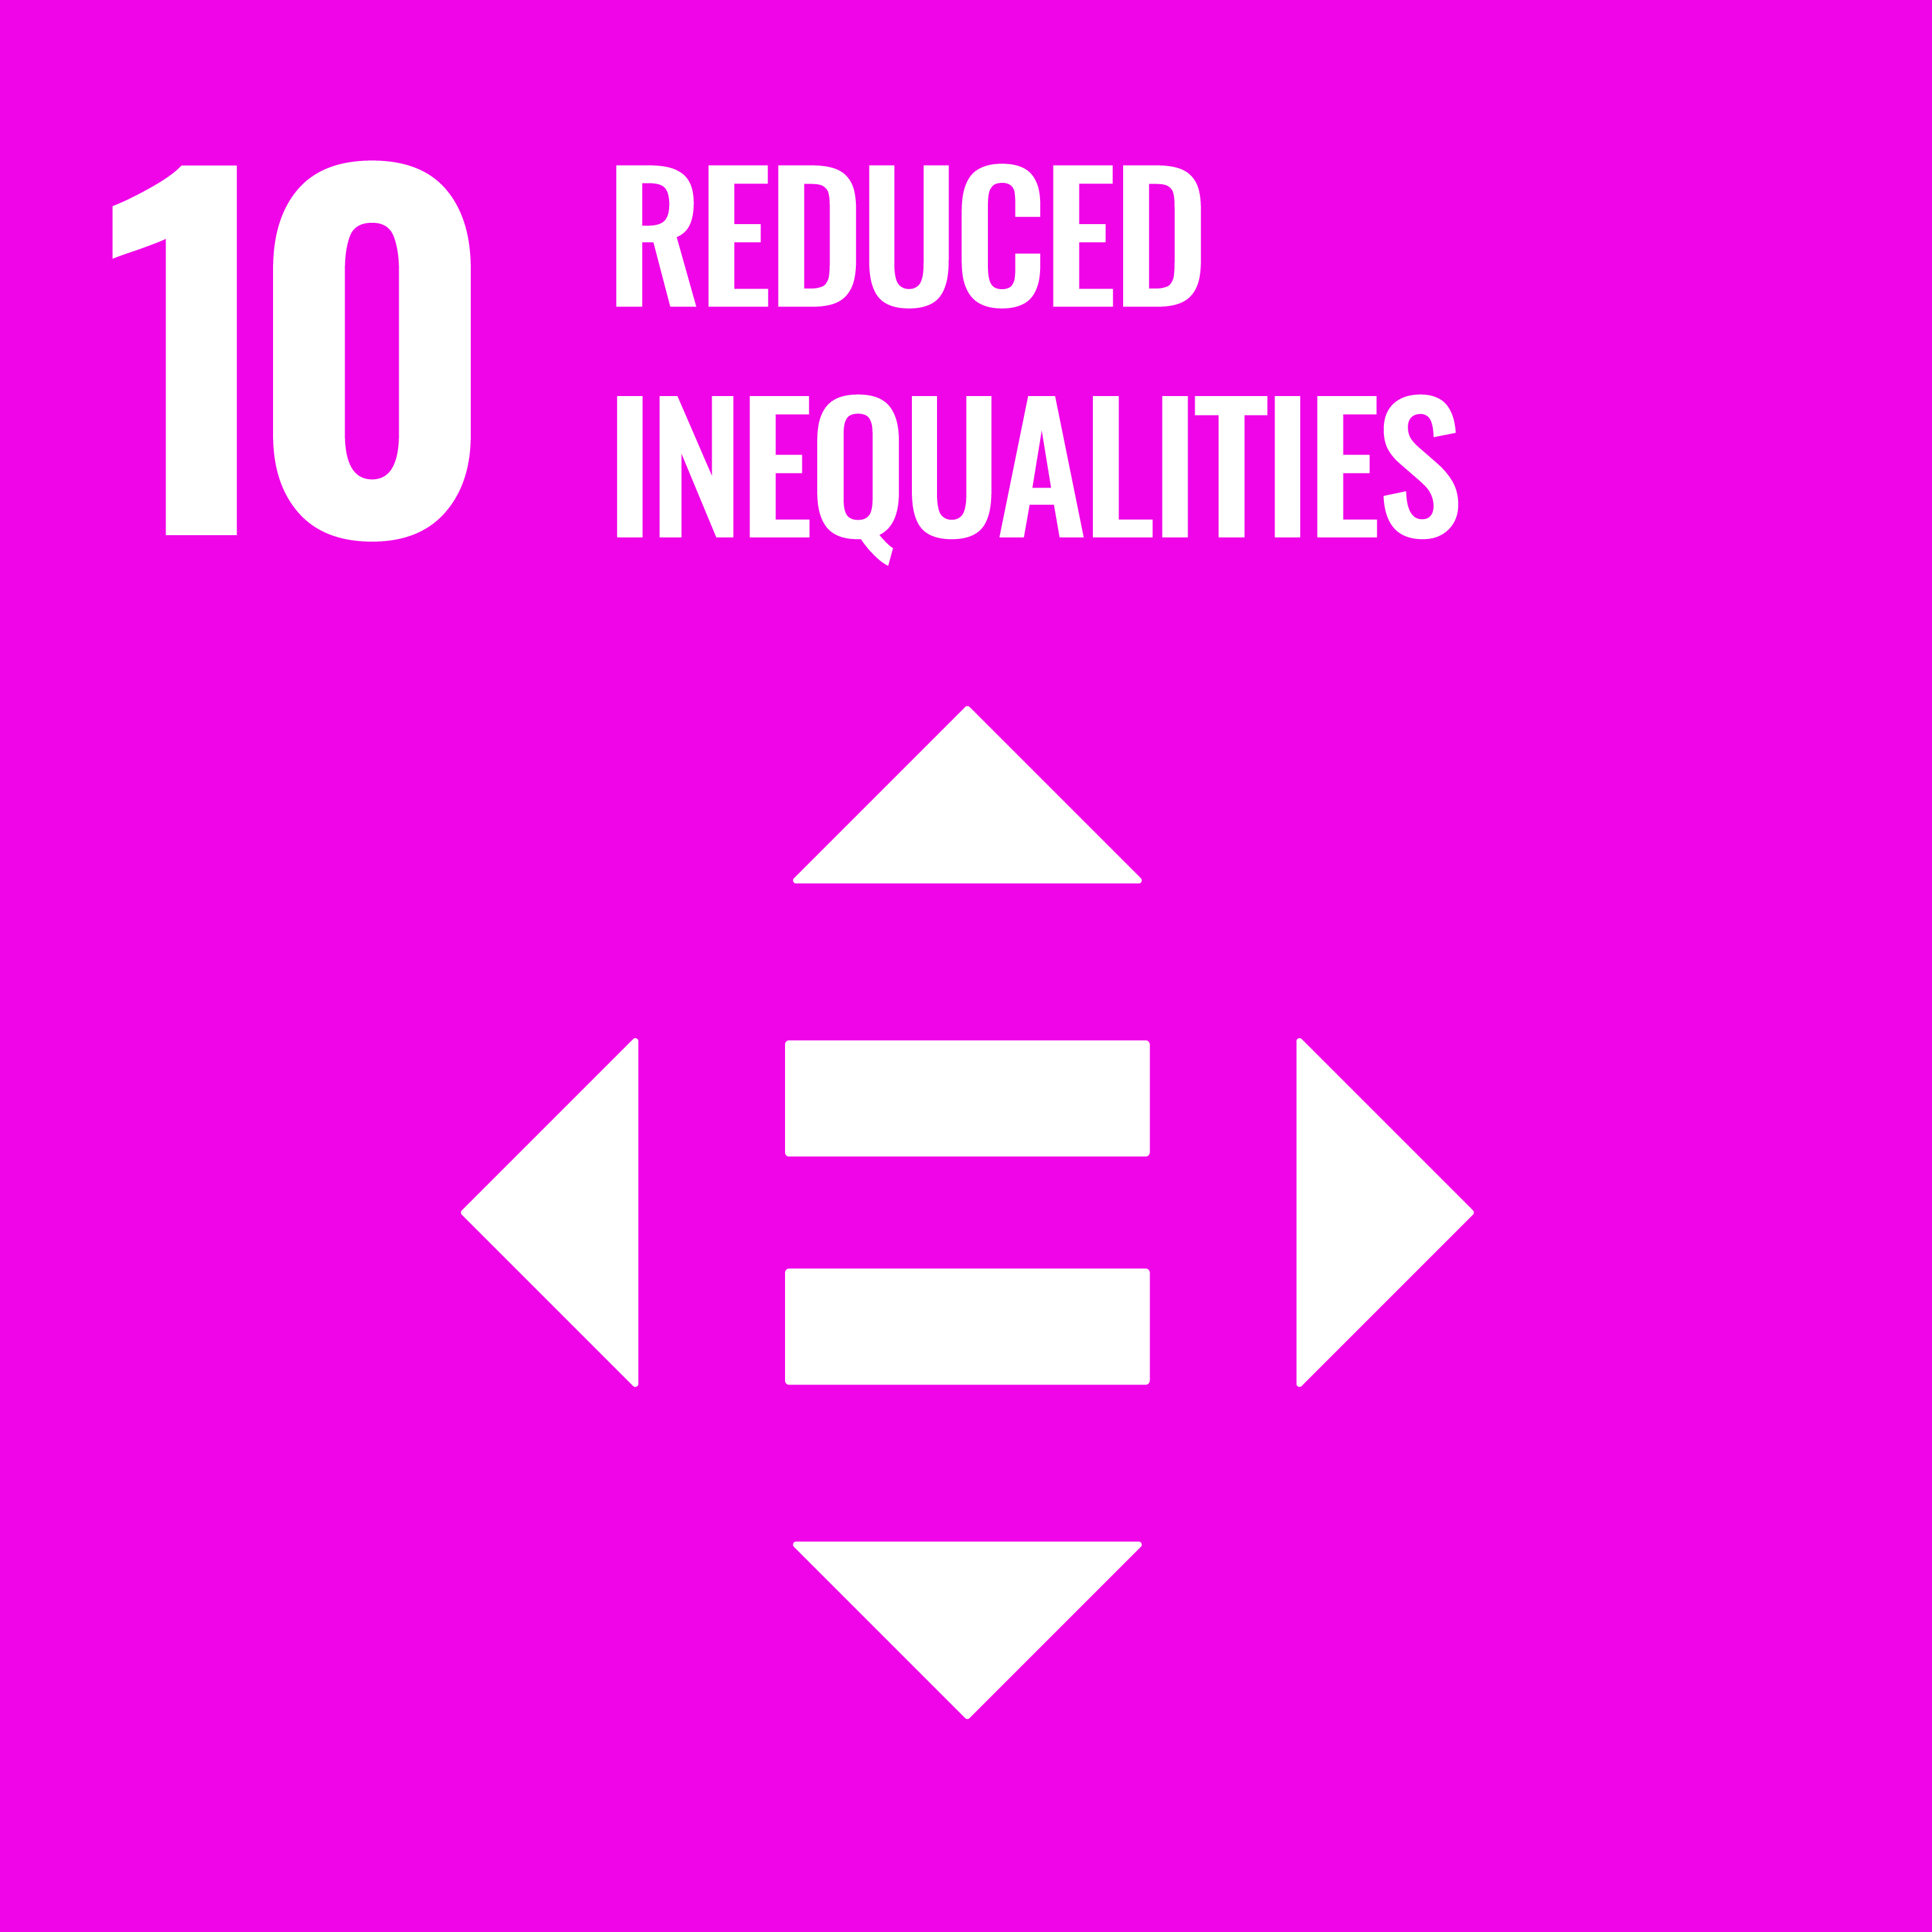 A pink graphic with the text "10: reduced inequalities"